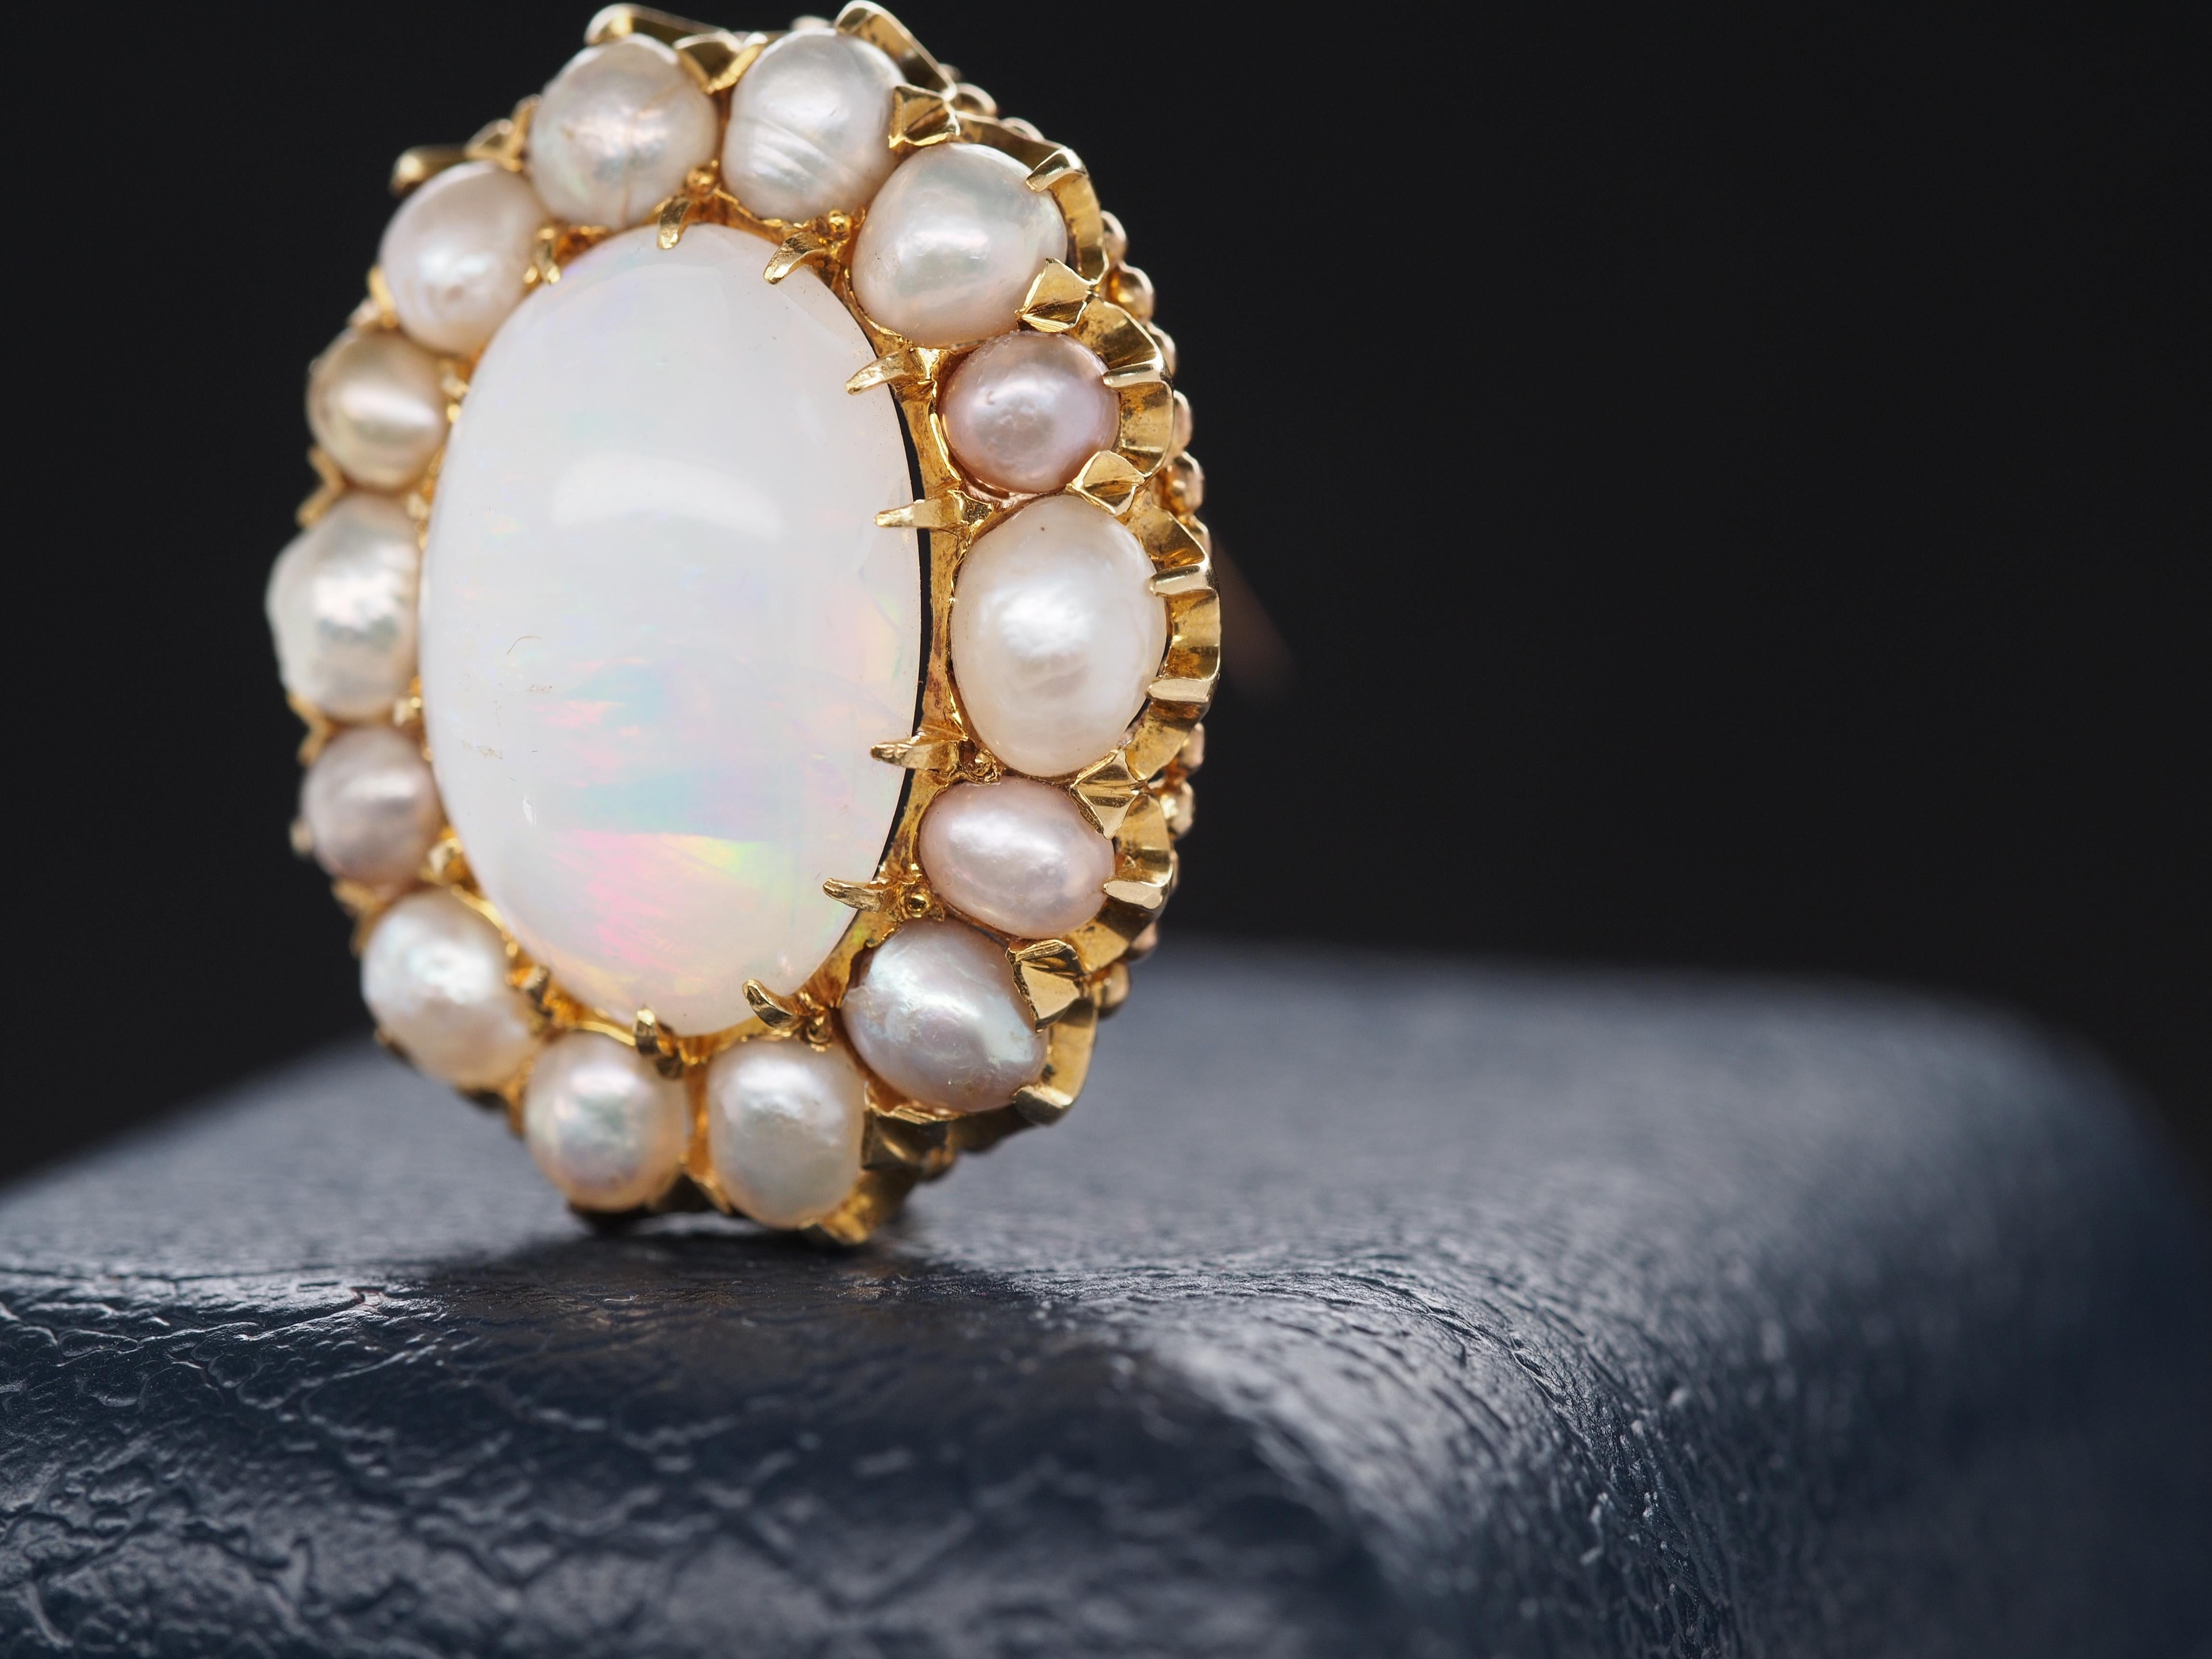 Edwardian 20k Yellow Gold Tiffany & Co Pearl and Opal Brooch, circa 1900s For Sale